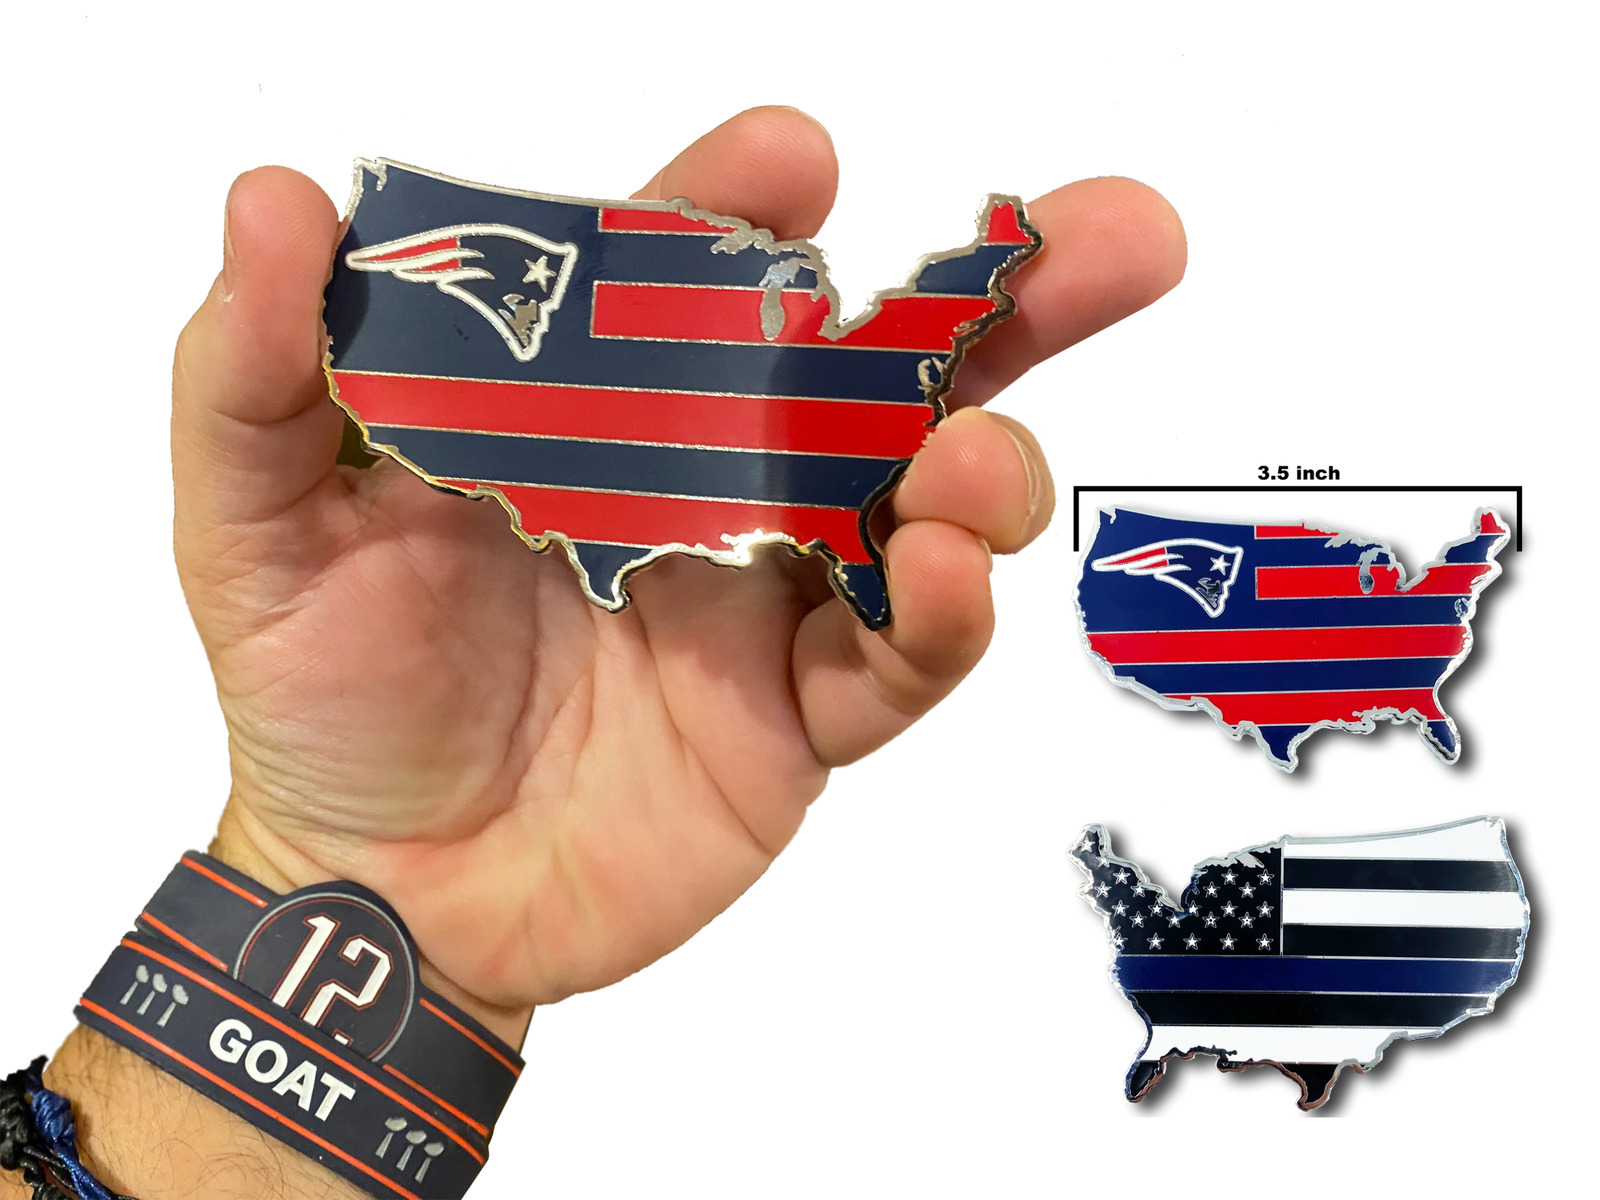 A-002 New England Patriots inspired Pats Nation THIN BLUE LINE US Map Challenge